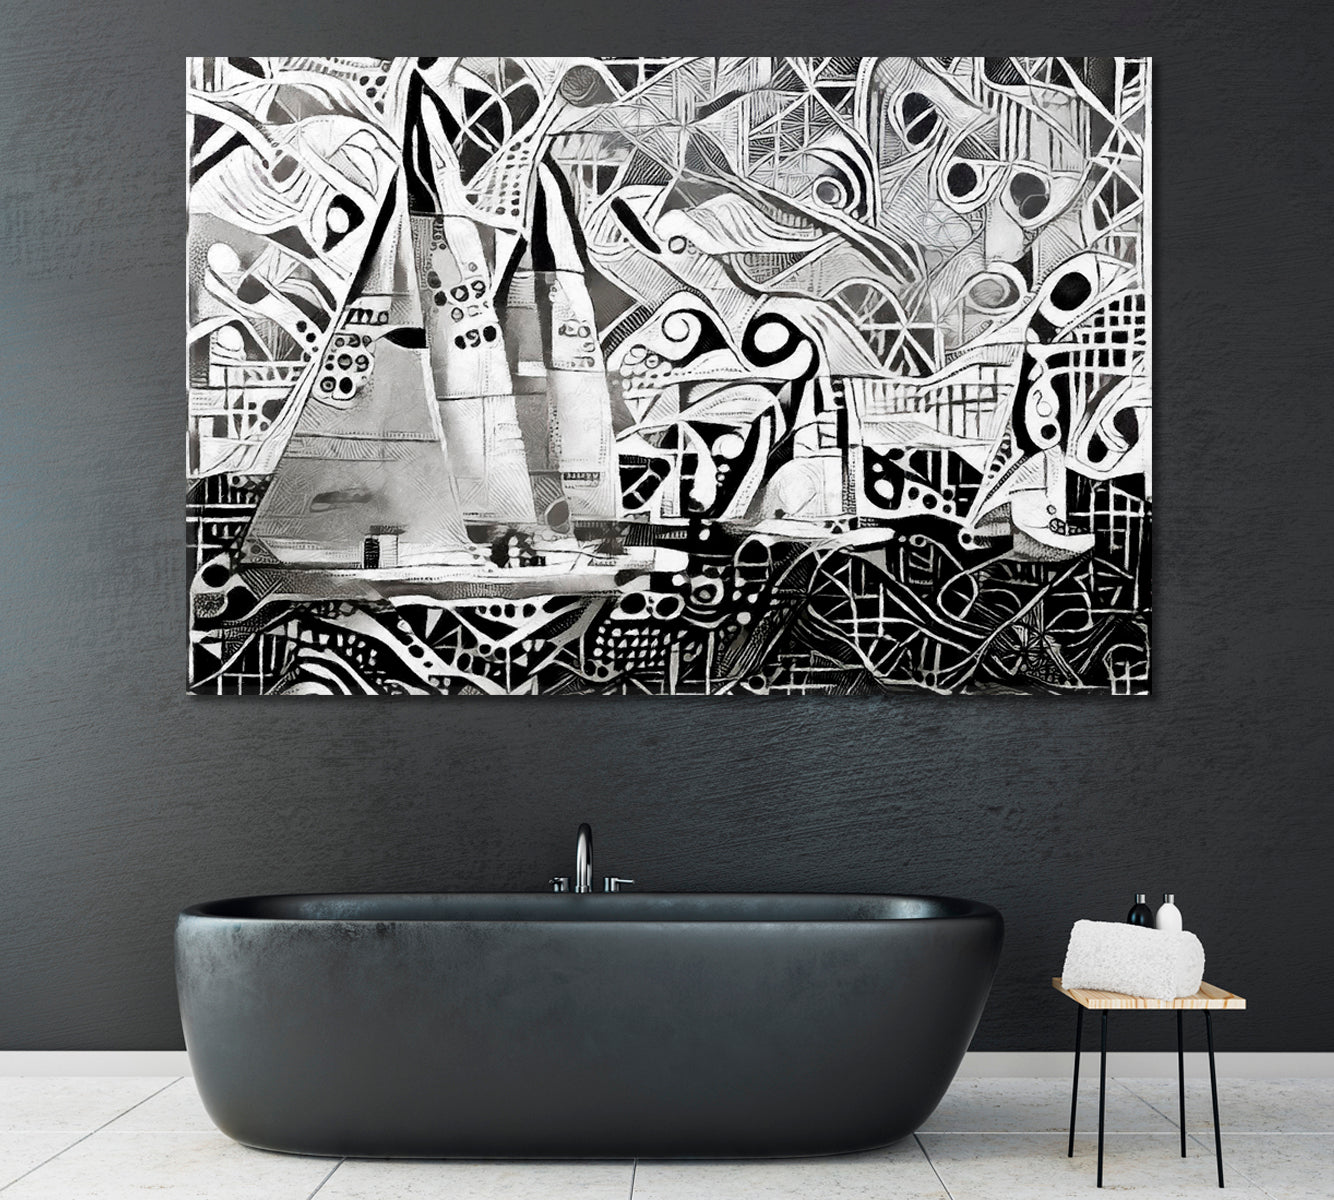 Monochrome Abstract Sailing Ship Canvas Print ArtLexy 1 Panel 24"x16" inches 